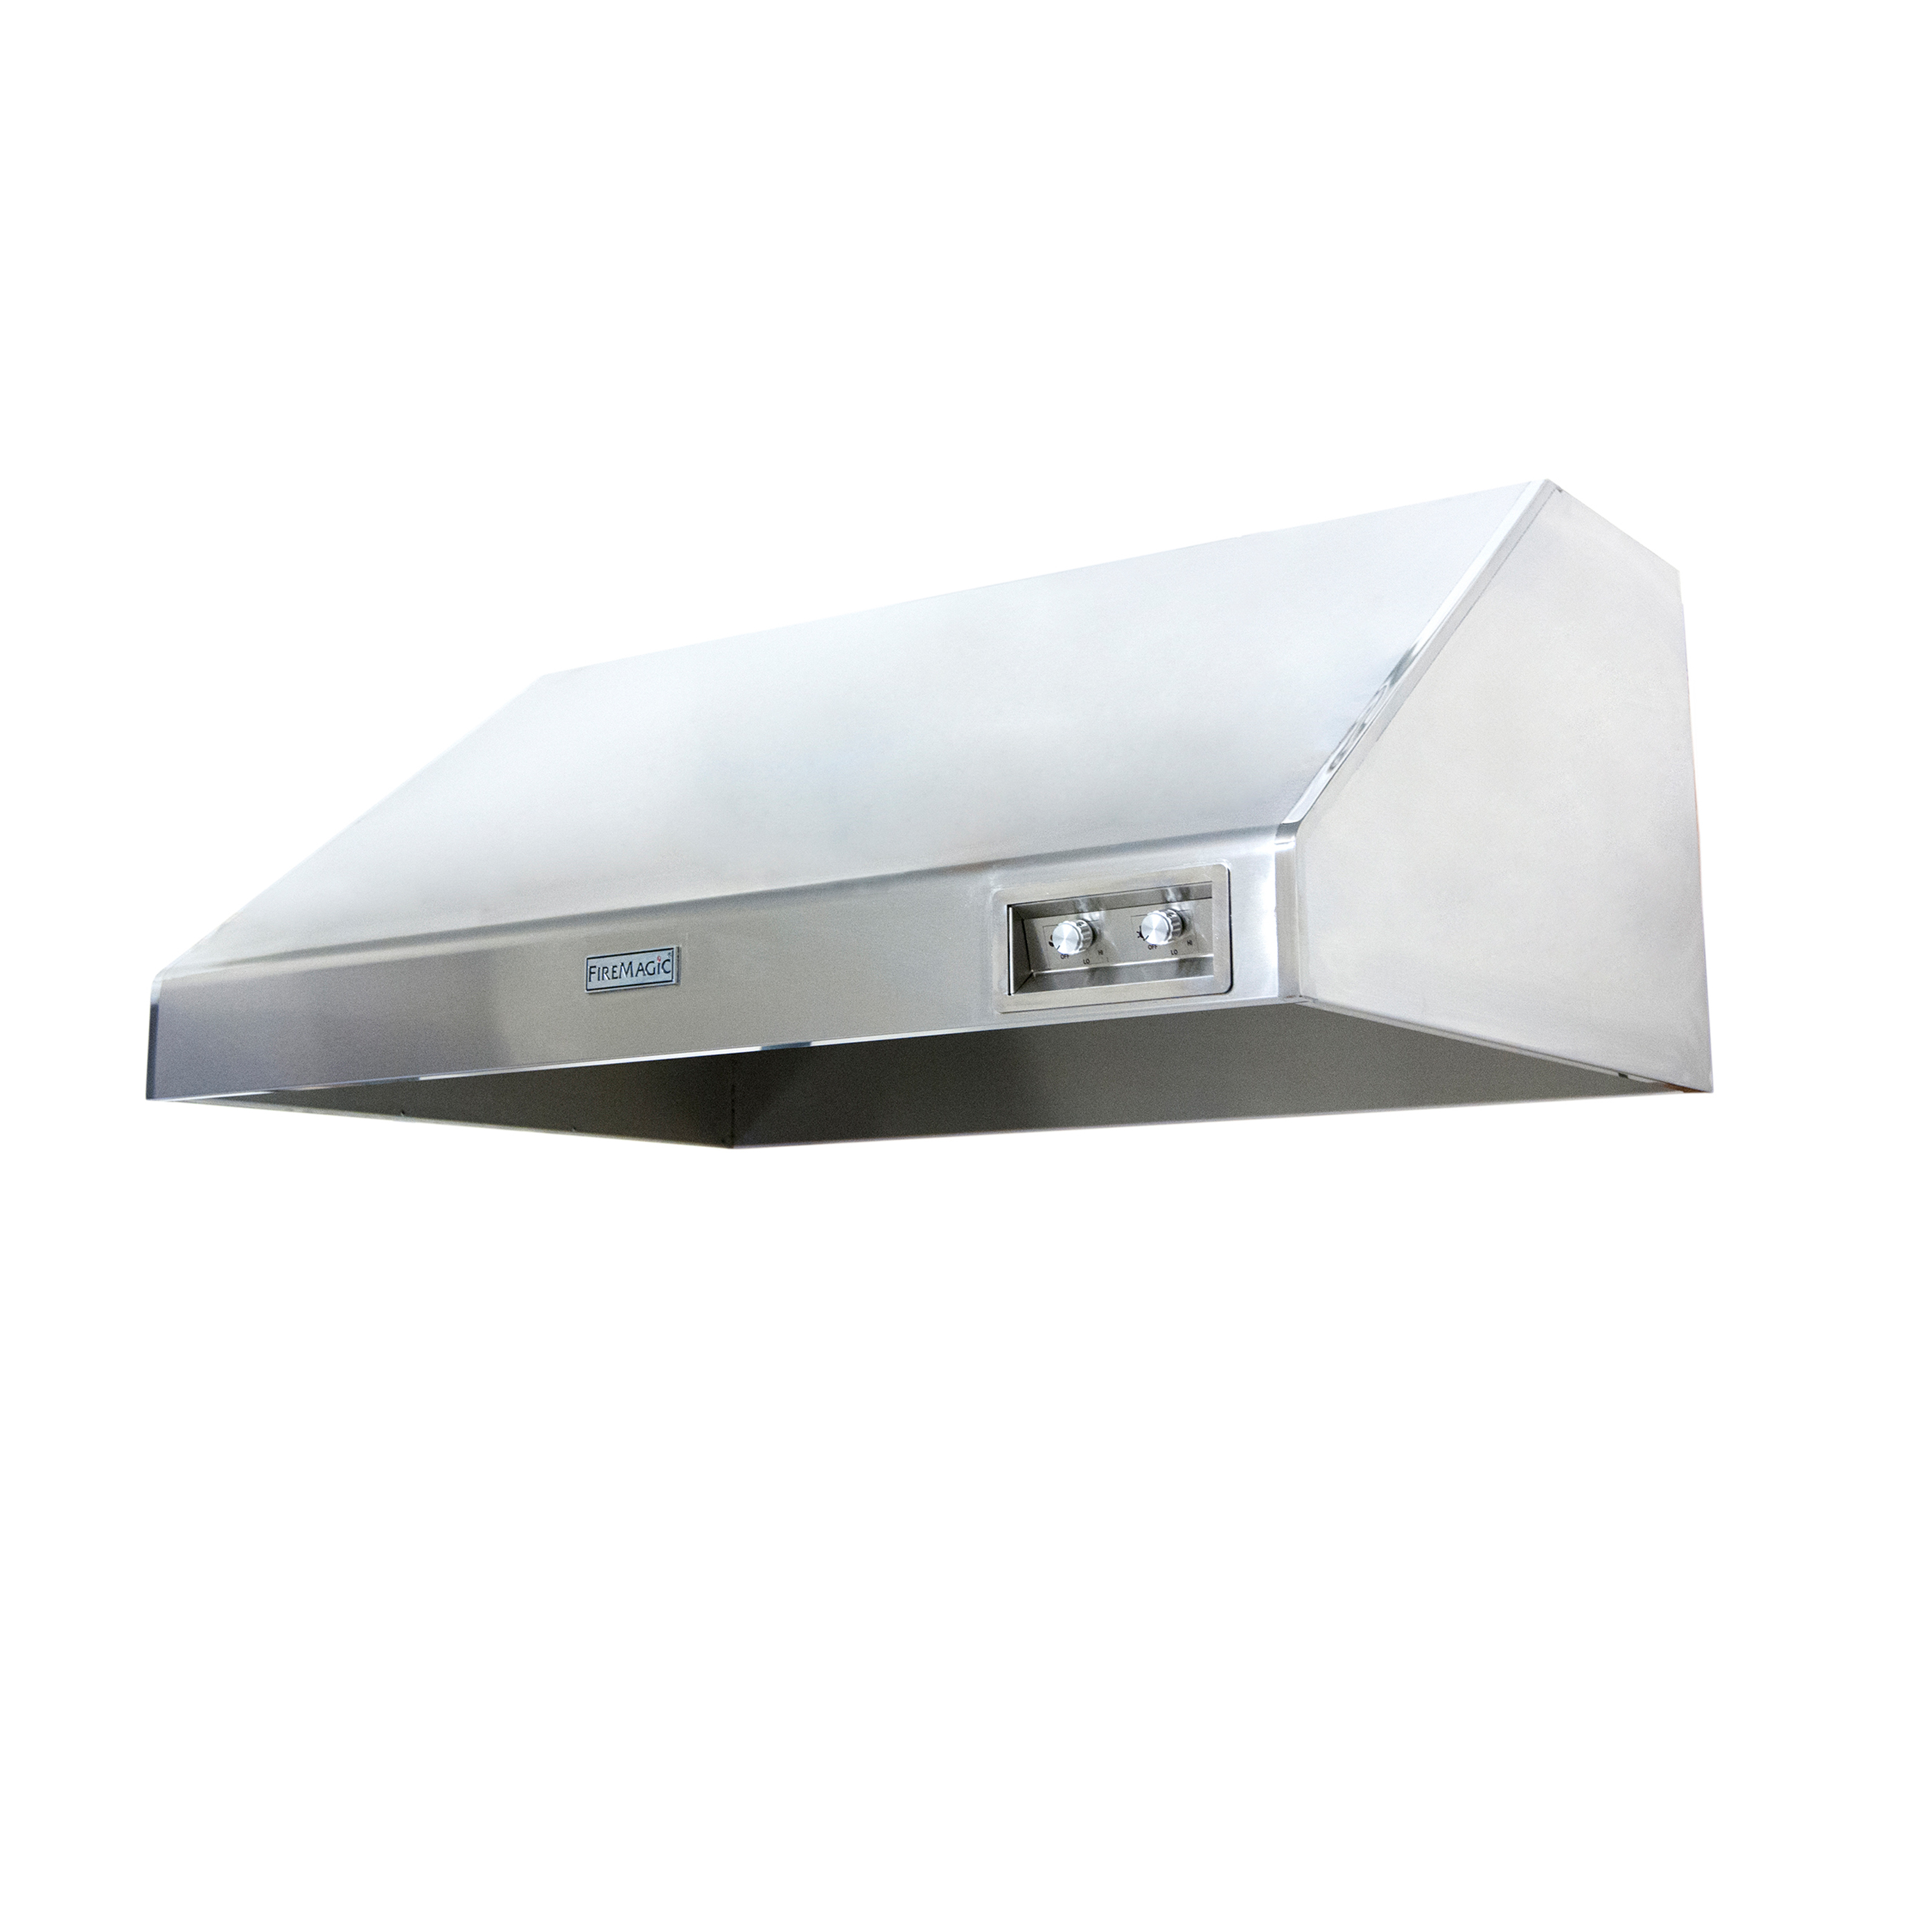 36 inch vent hood with fan (1200 cfm) product image